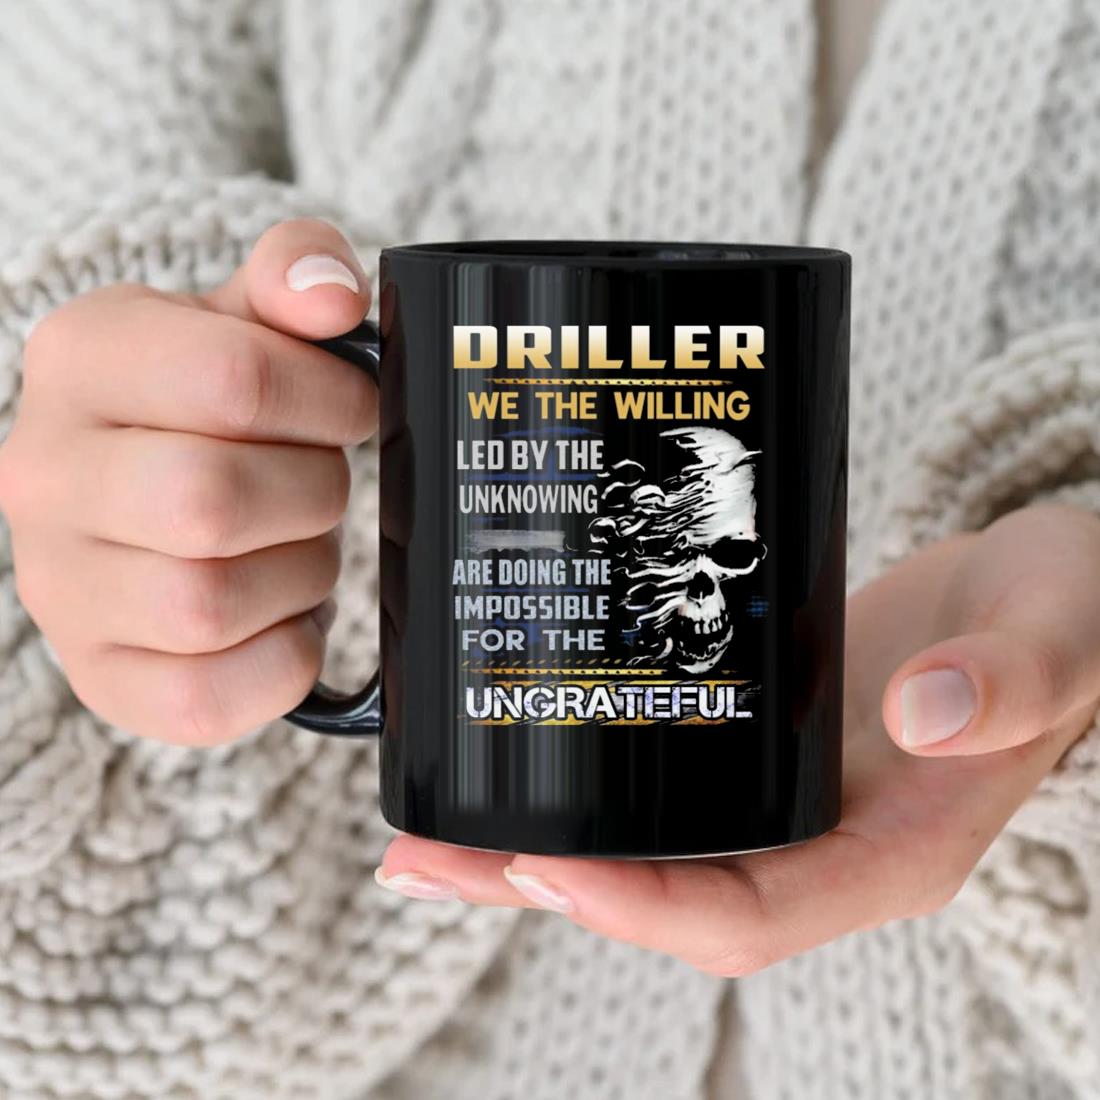 Driller We The Willing Led By The Unknowing Are Doing The Impossible For The Ungrateful Mug nhu